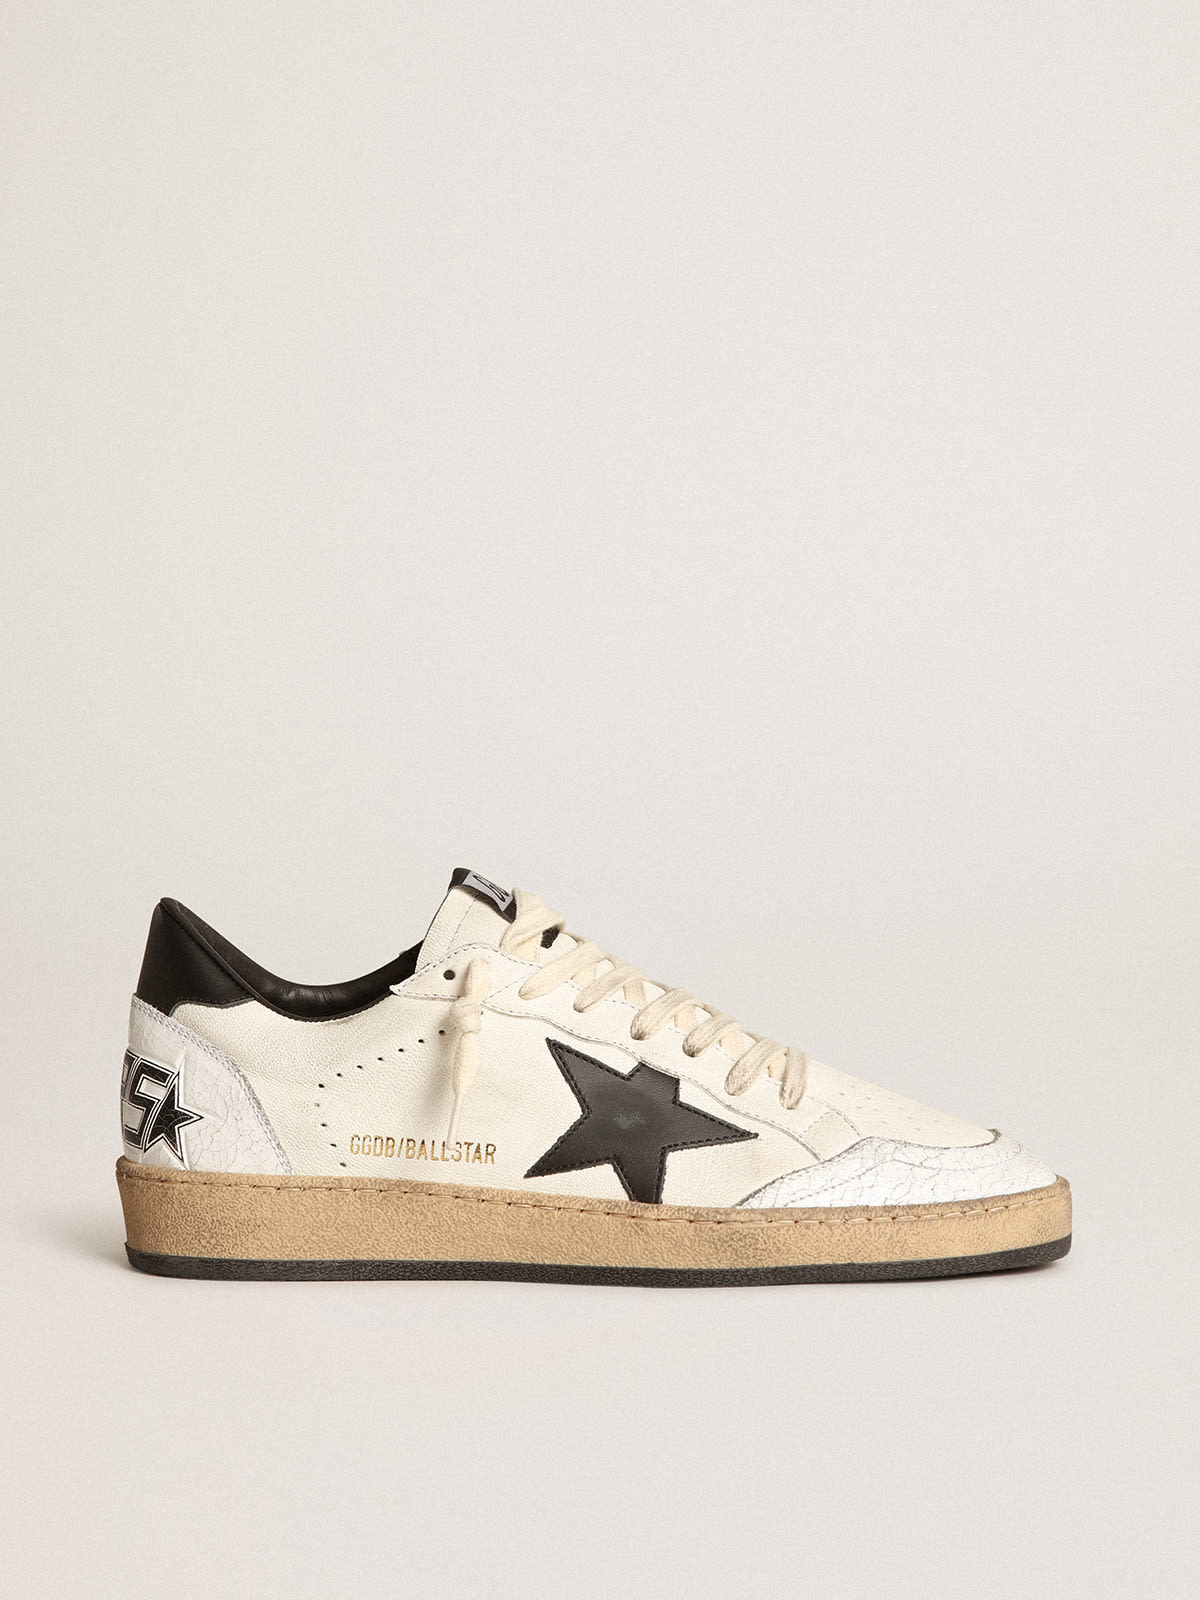 Golden Goose - Women's Ball Star sneakers in white nappa leather with black leather star and heel tab in 